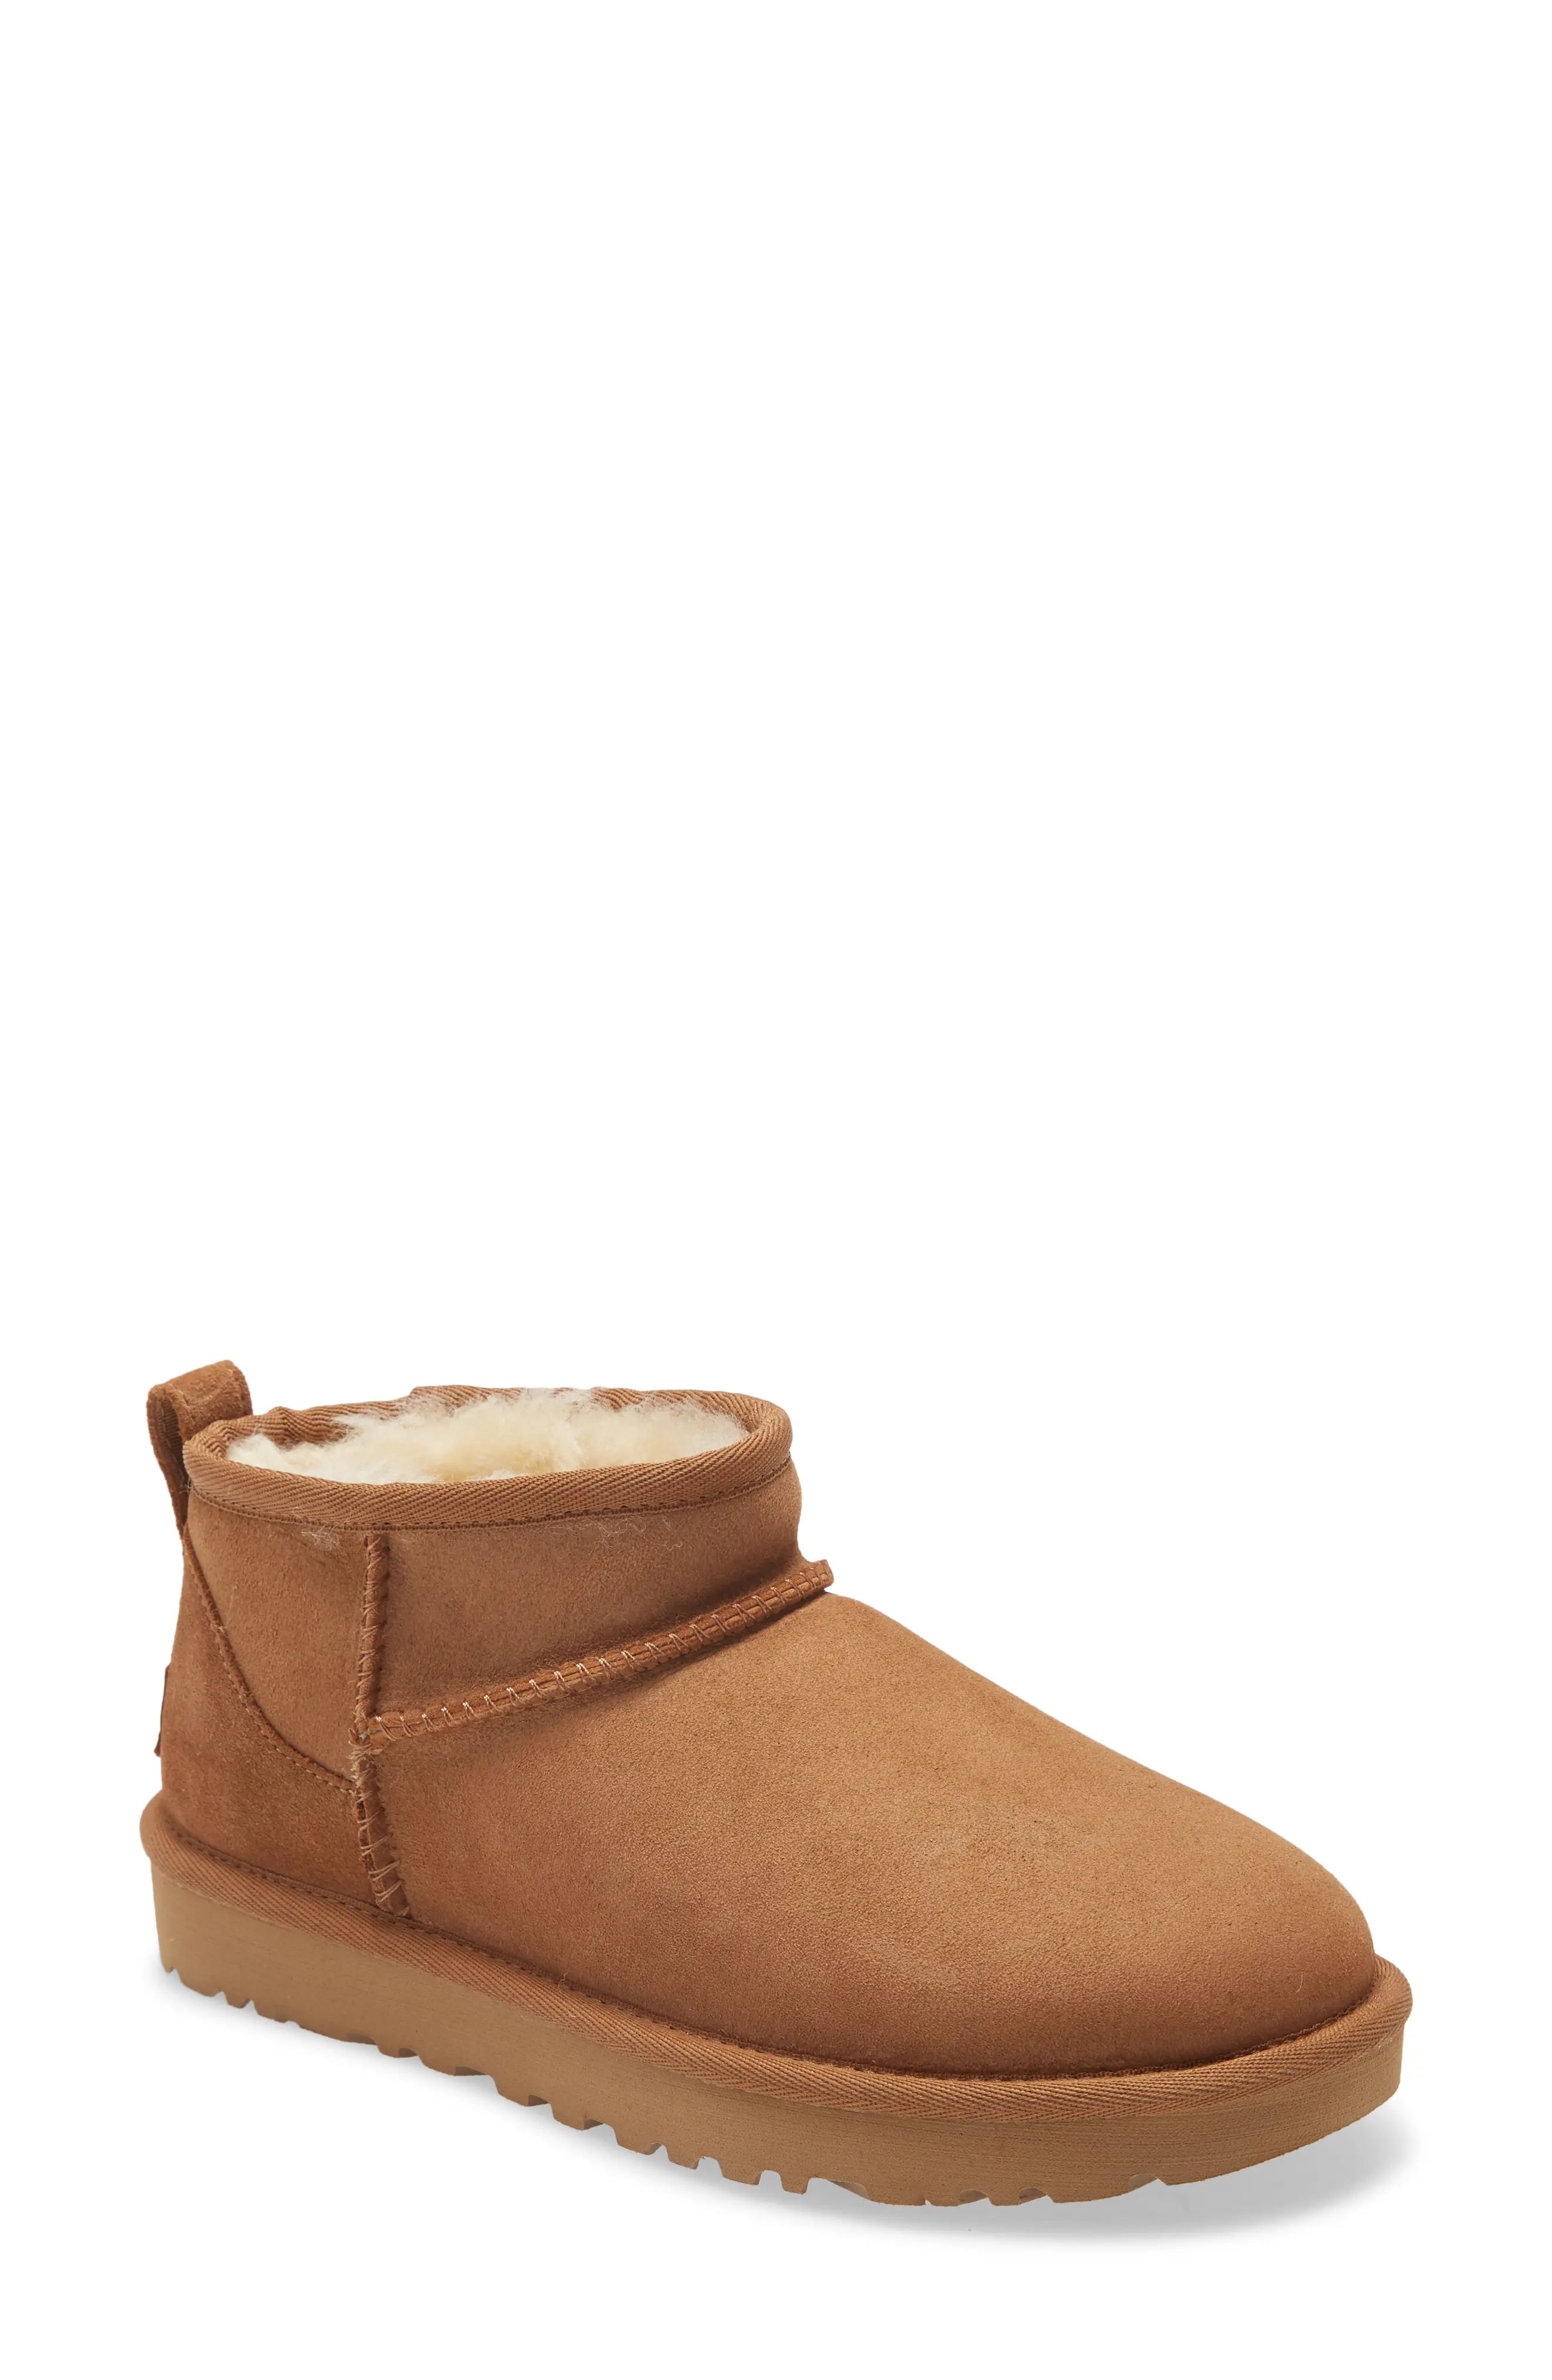 Women's UGG Ultra Mini Classic Boot, Size 12 M - Brown | Nordstrom